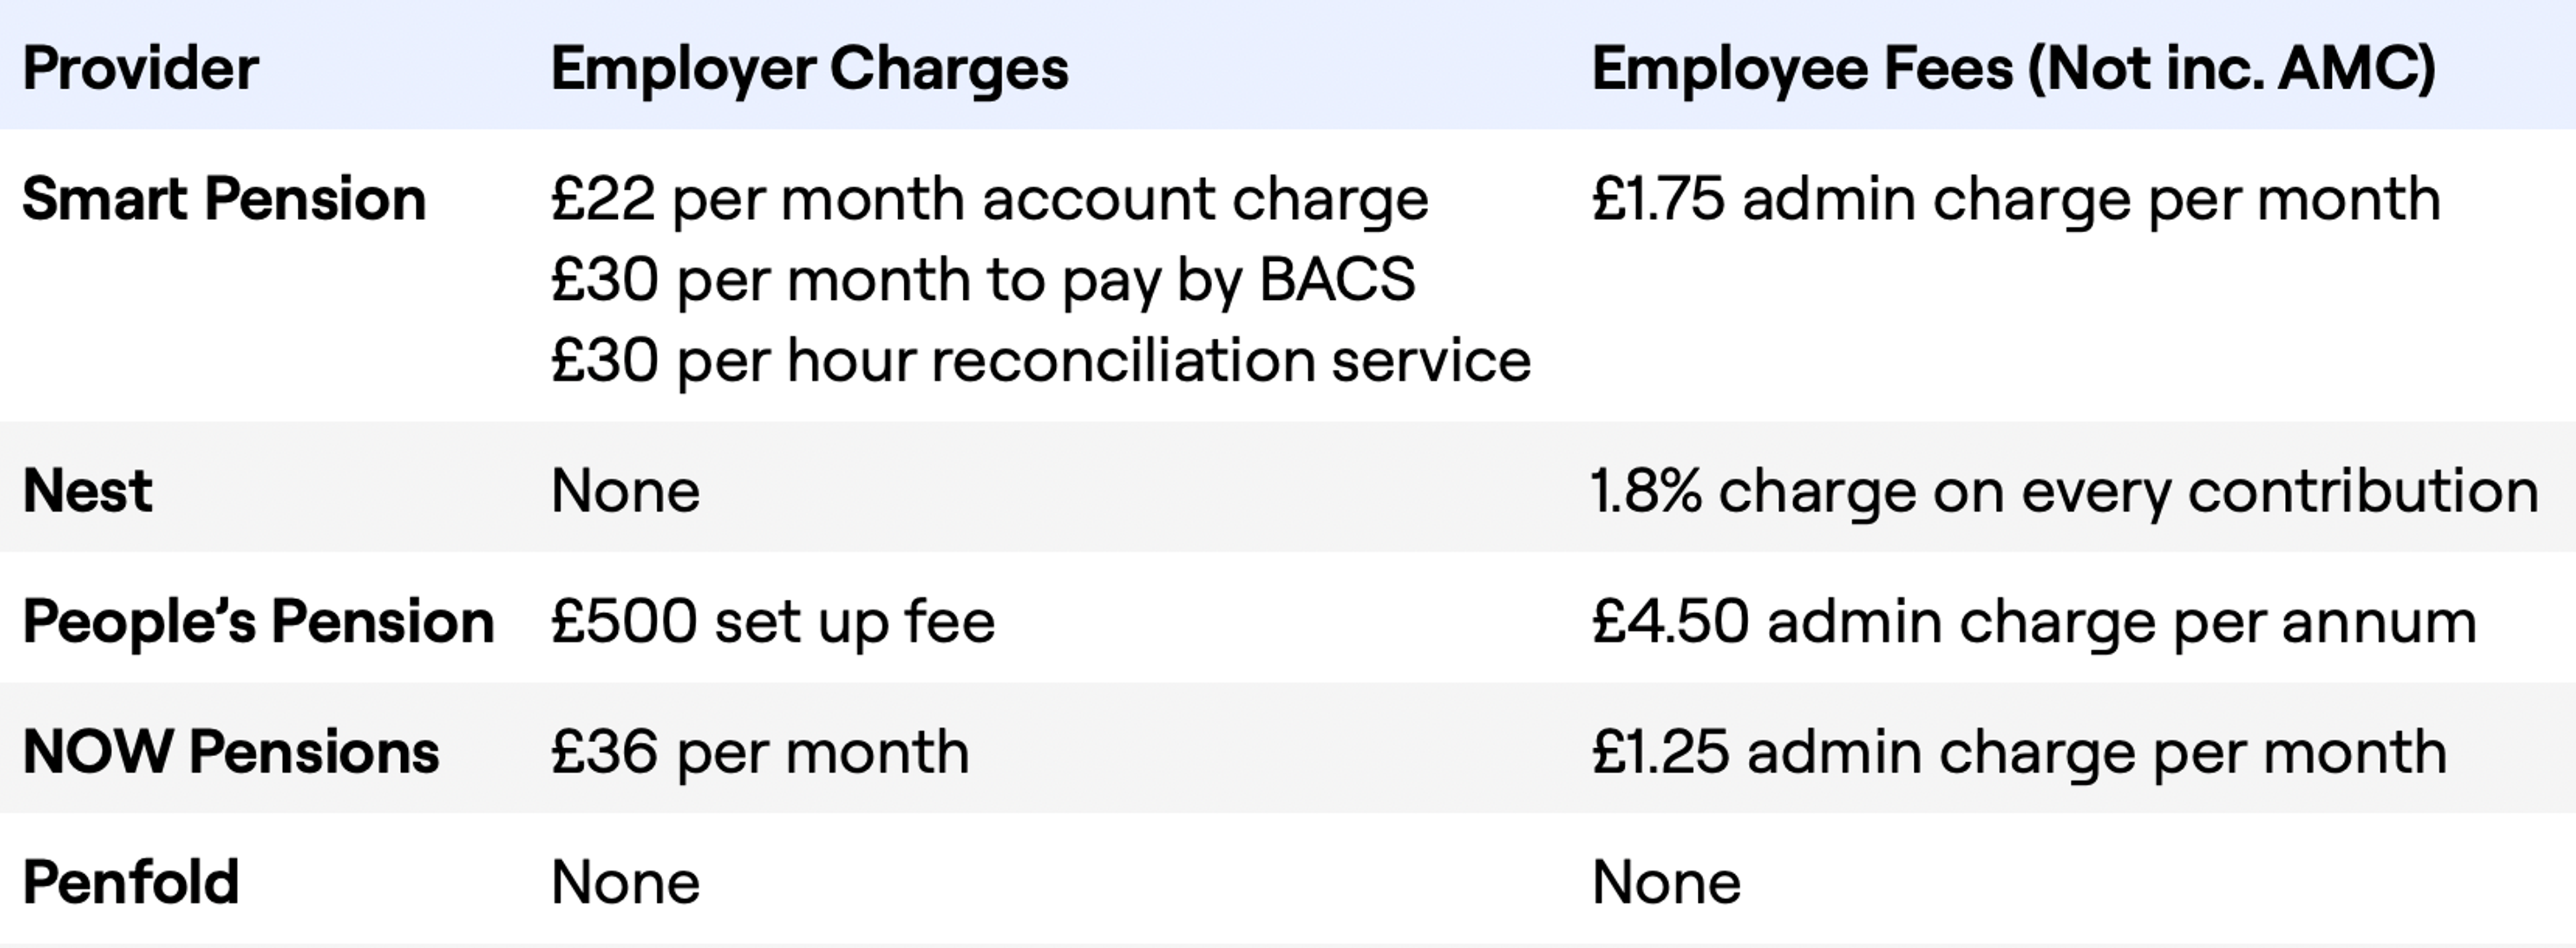 A table showing pension provider charges for employers and employees